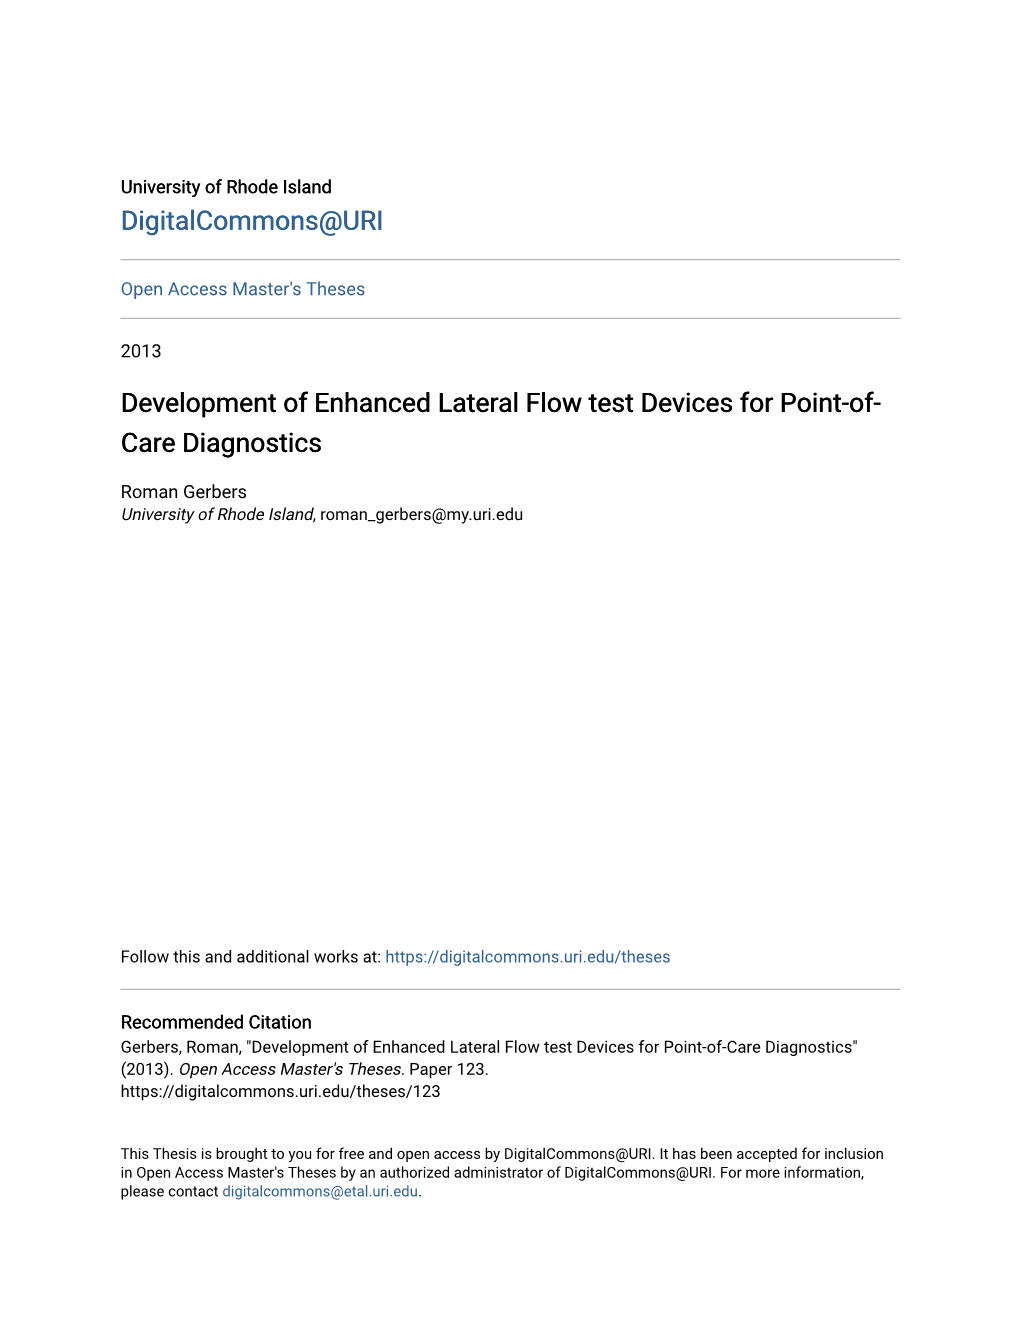 Development of Enhanced Lateral Flow Test Devices for Point-Of-Care Diagnostics" (2013)